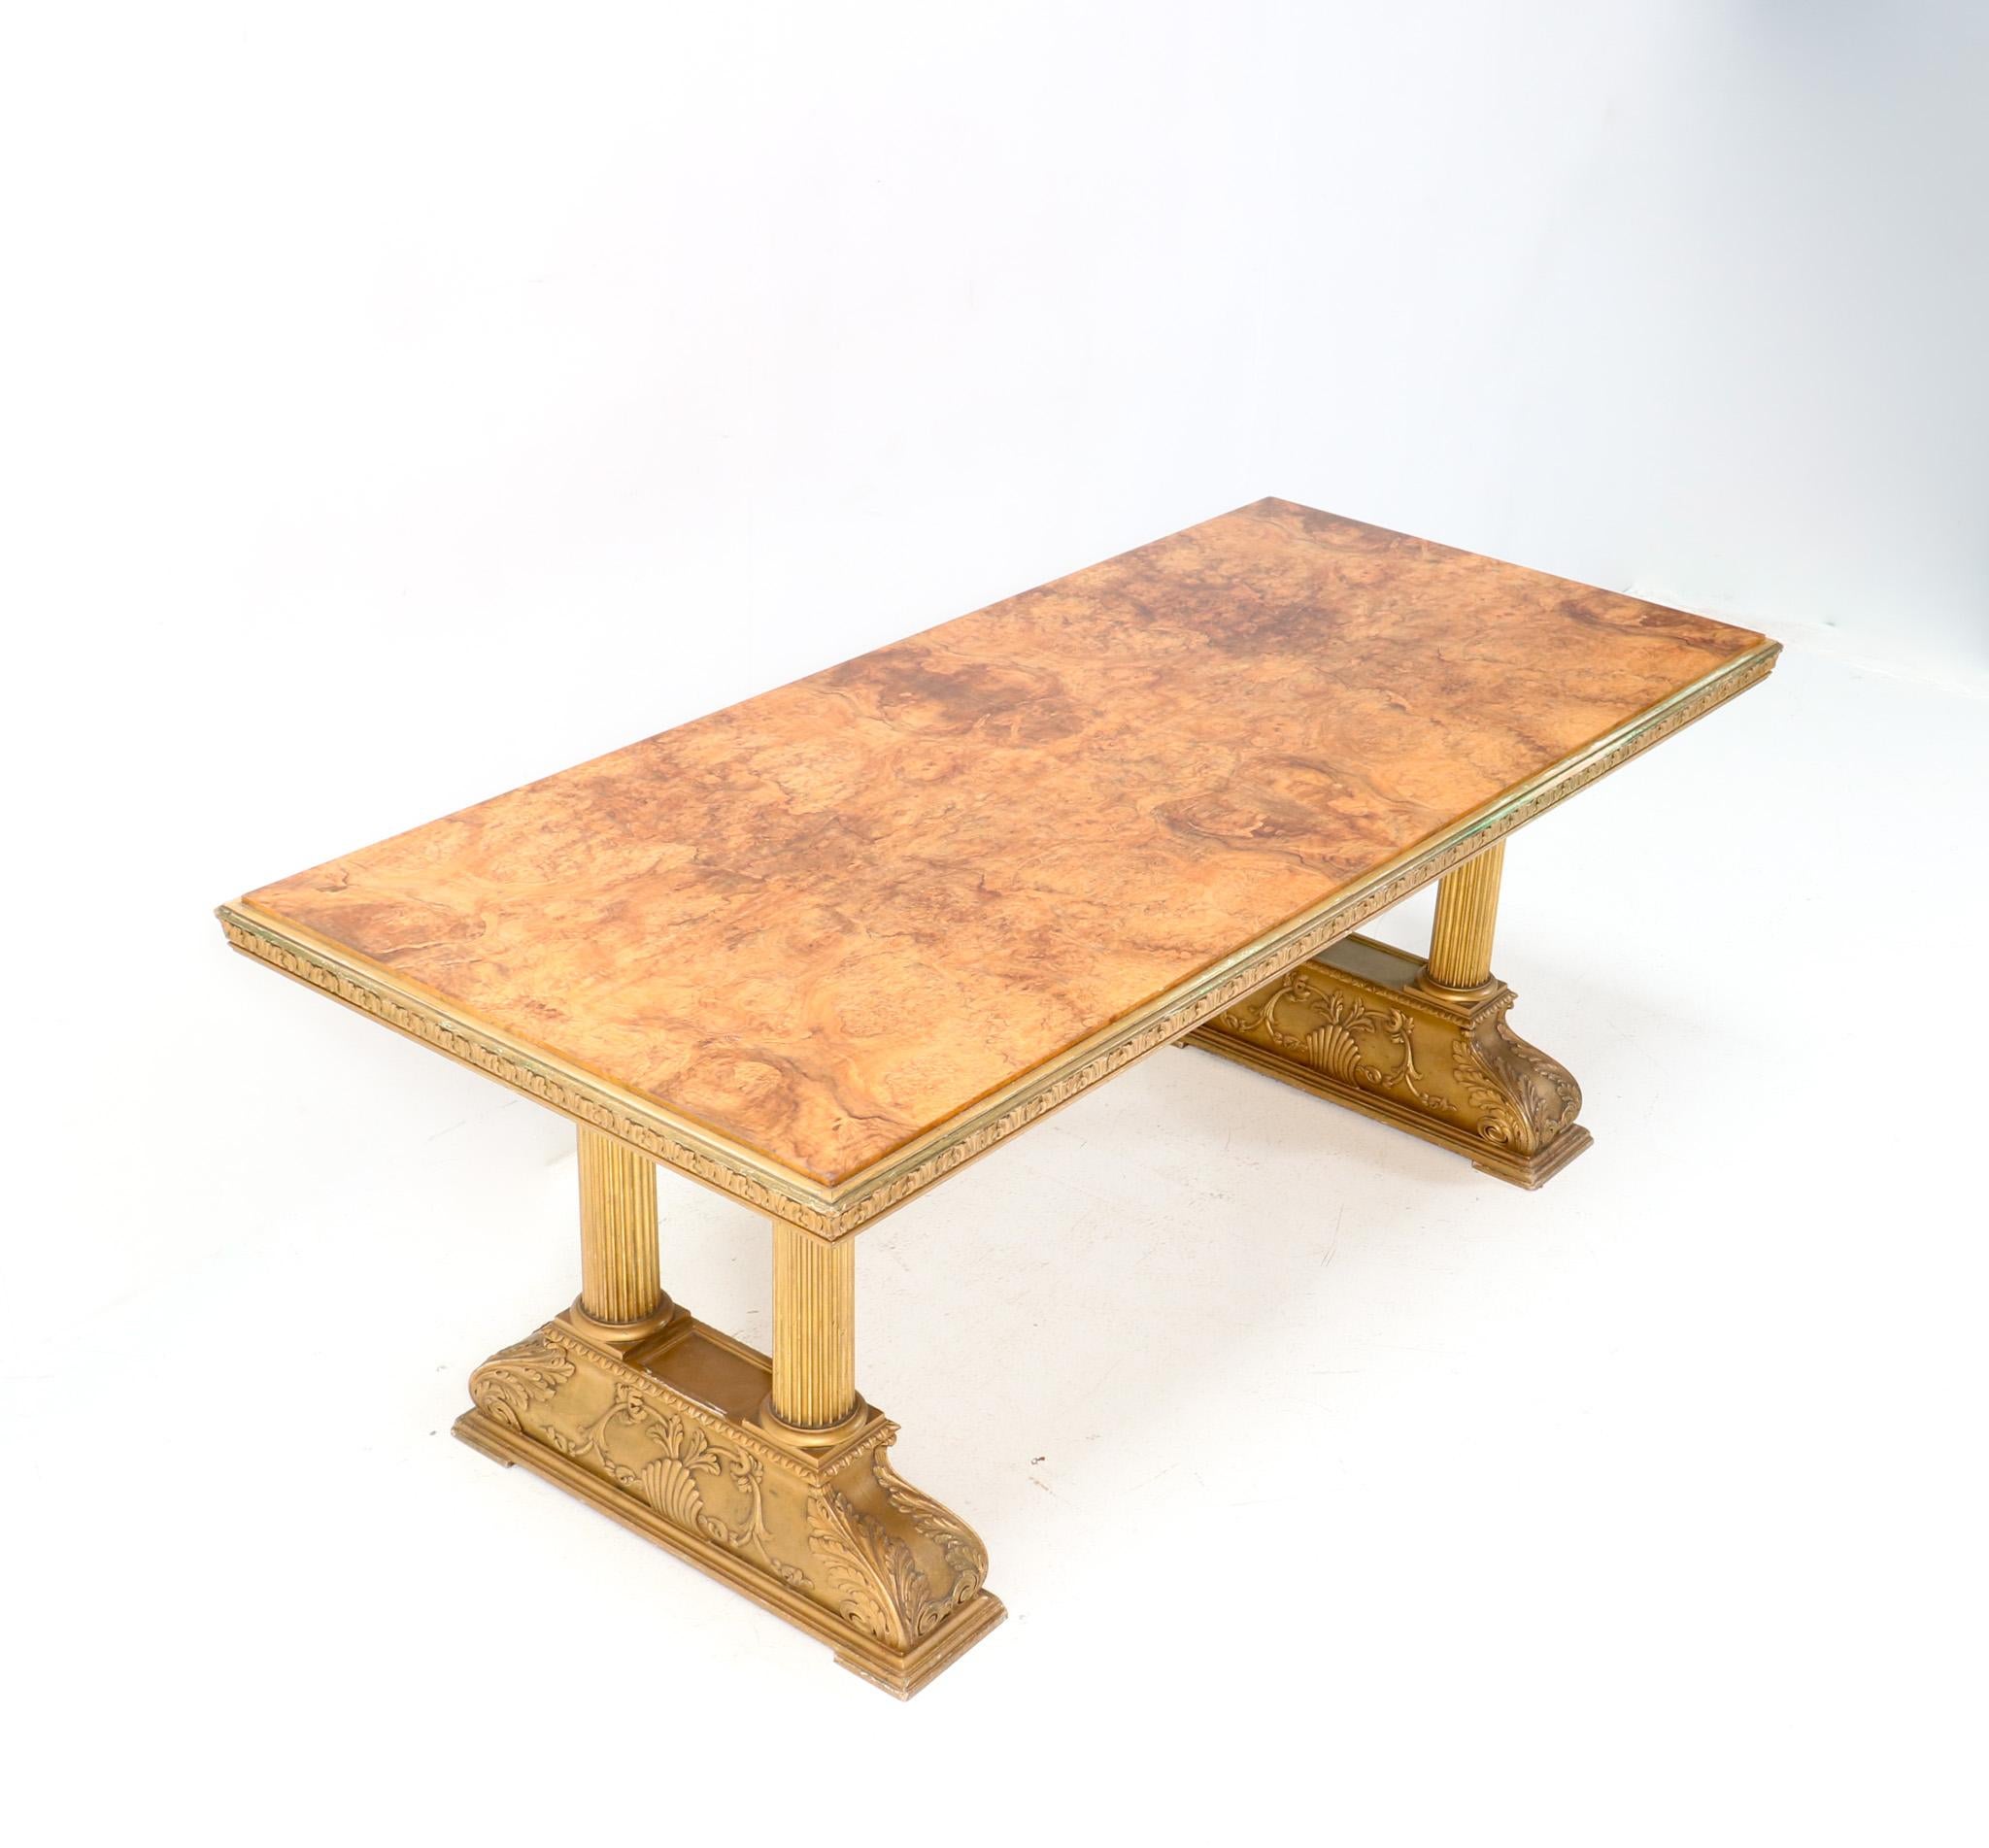 Art Deco Dining Room Table Caesar by Axel Einar Hjorth with Original Extensions, 1920s For Sale